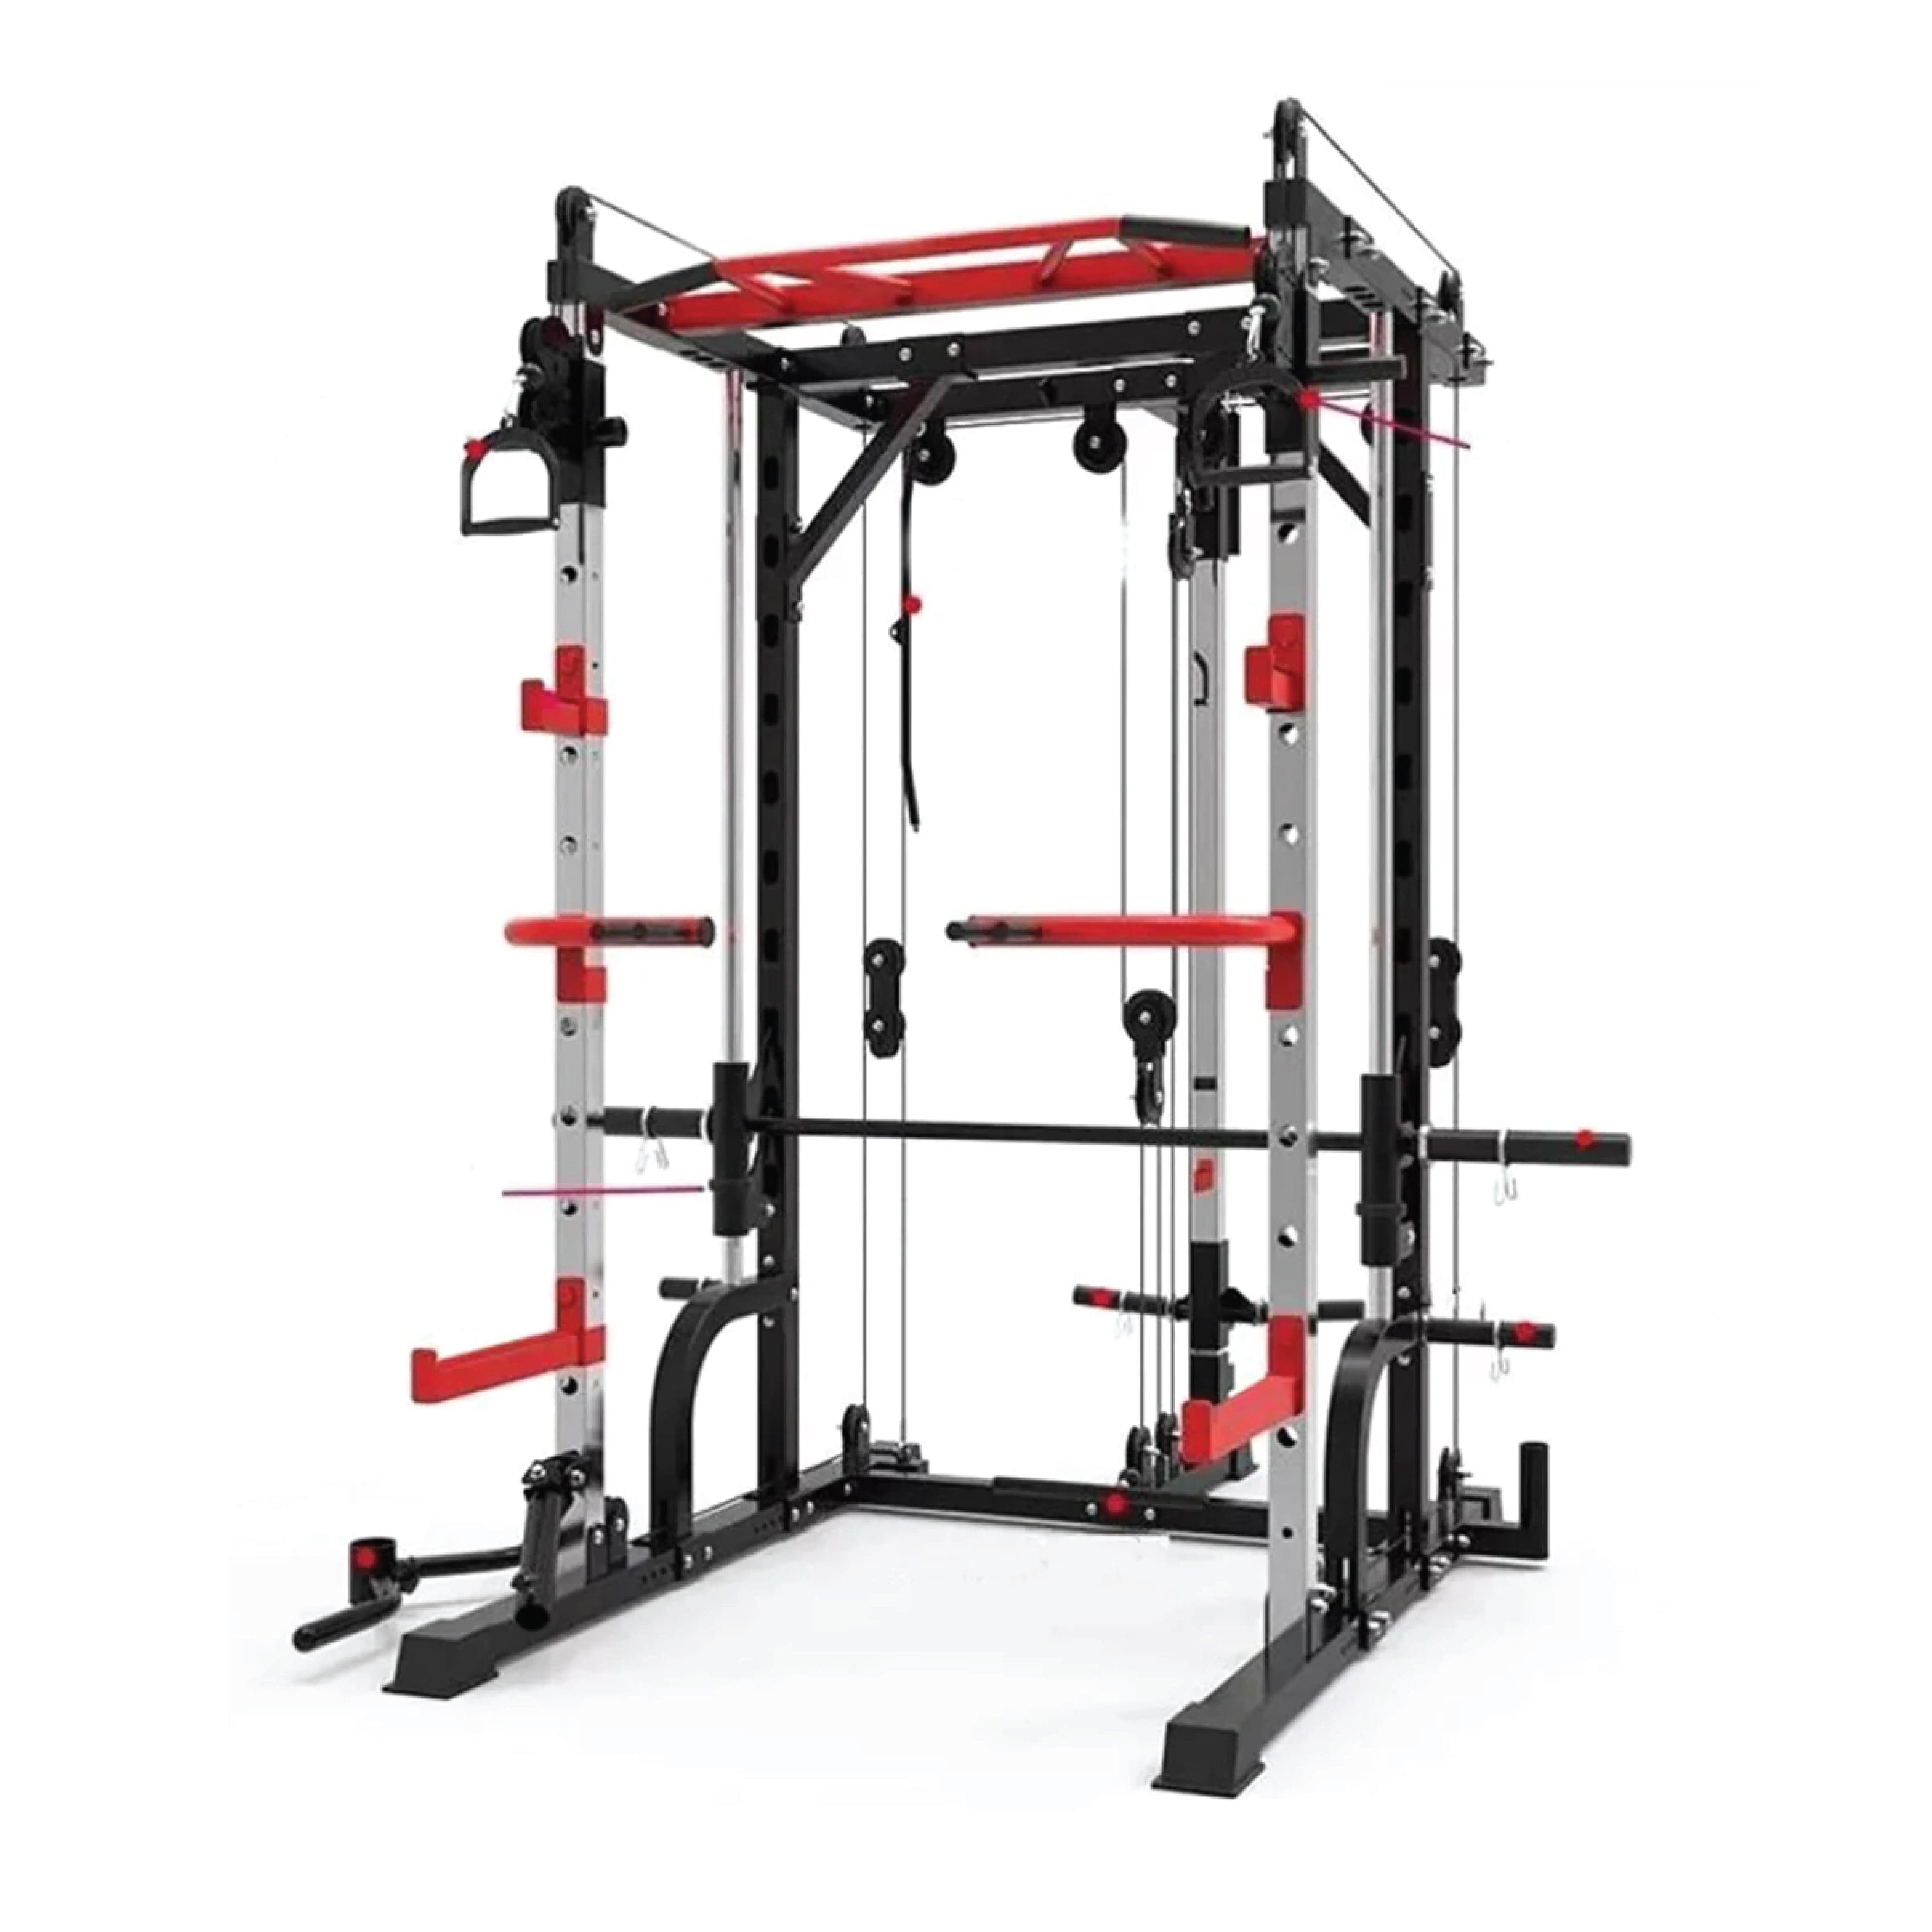 Combo Deal | 1441 Fitness Smith Machine With Functional Trainer J009 + 7 Ft Bar With Tri Grip 80 Kg Set + Adjustable Bench A8007 + 15 MM Flooring - Athletix.ae